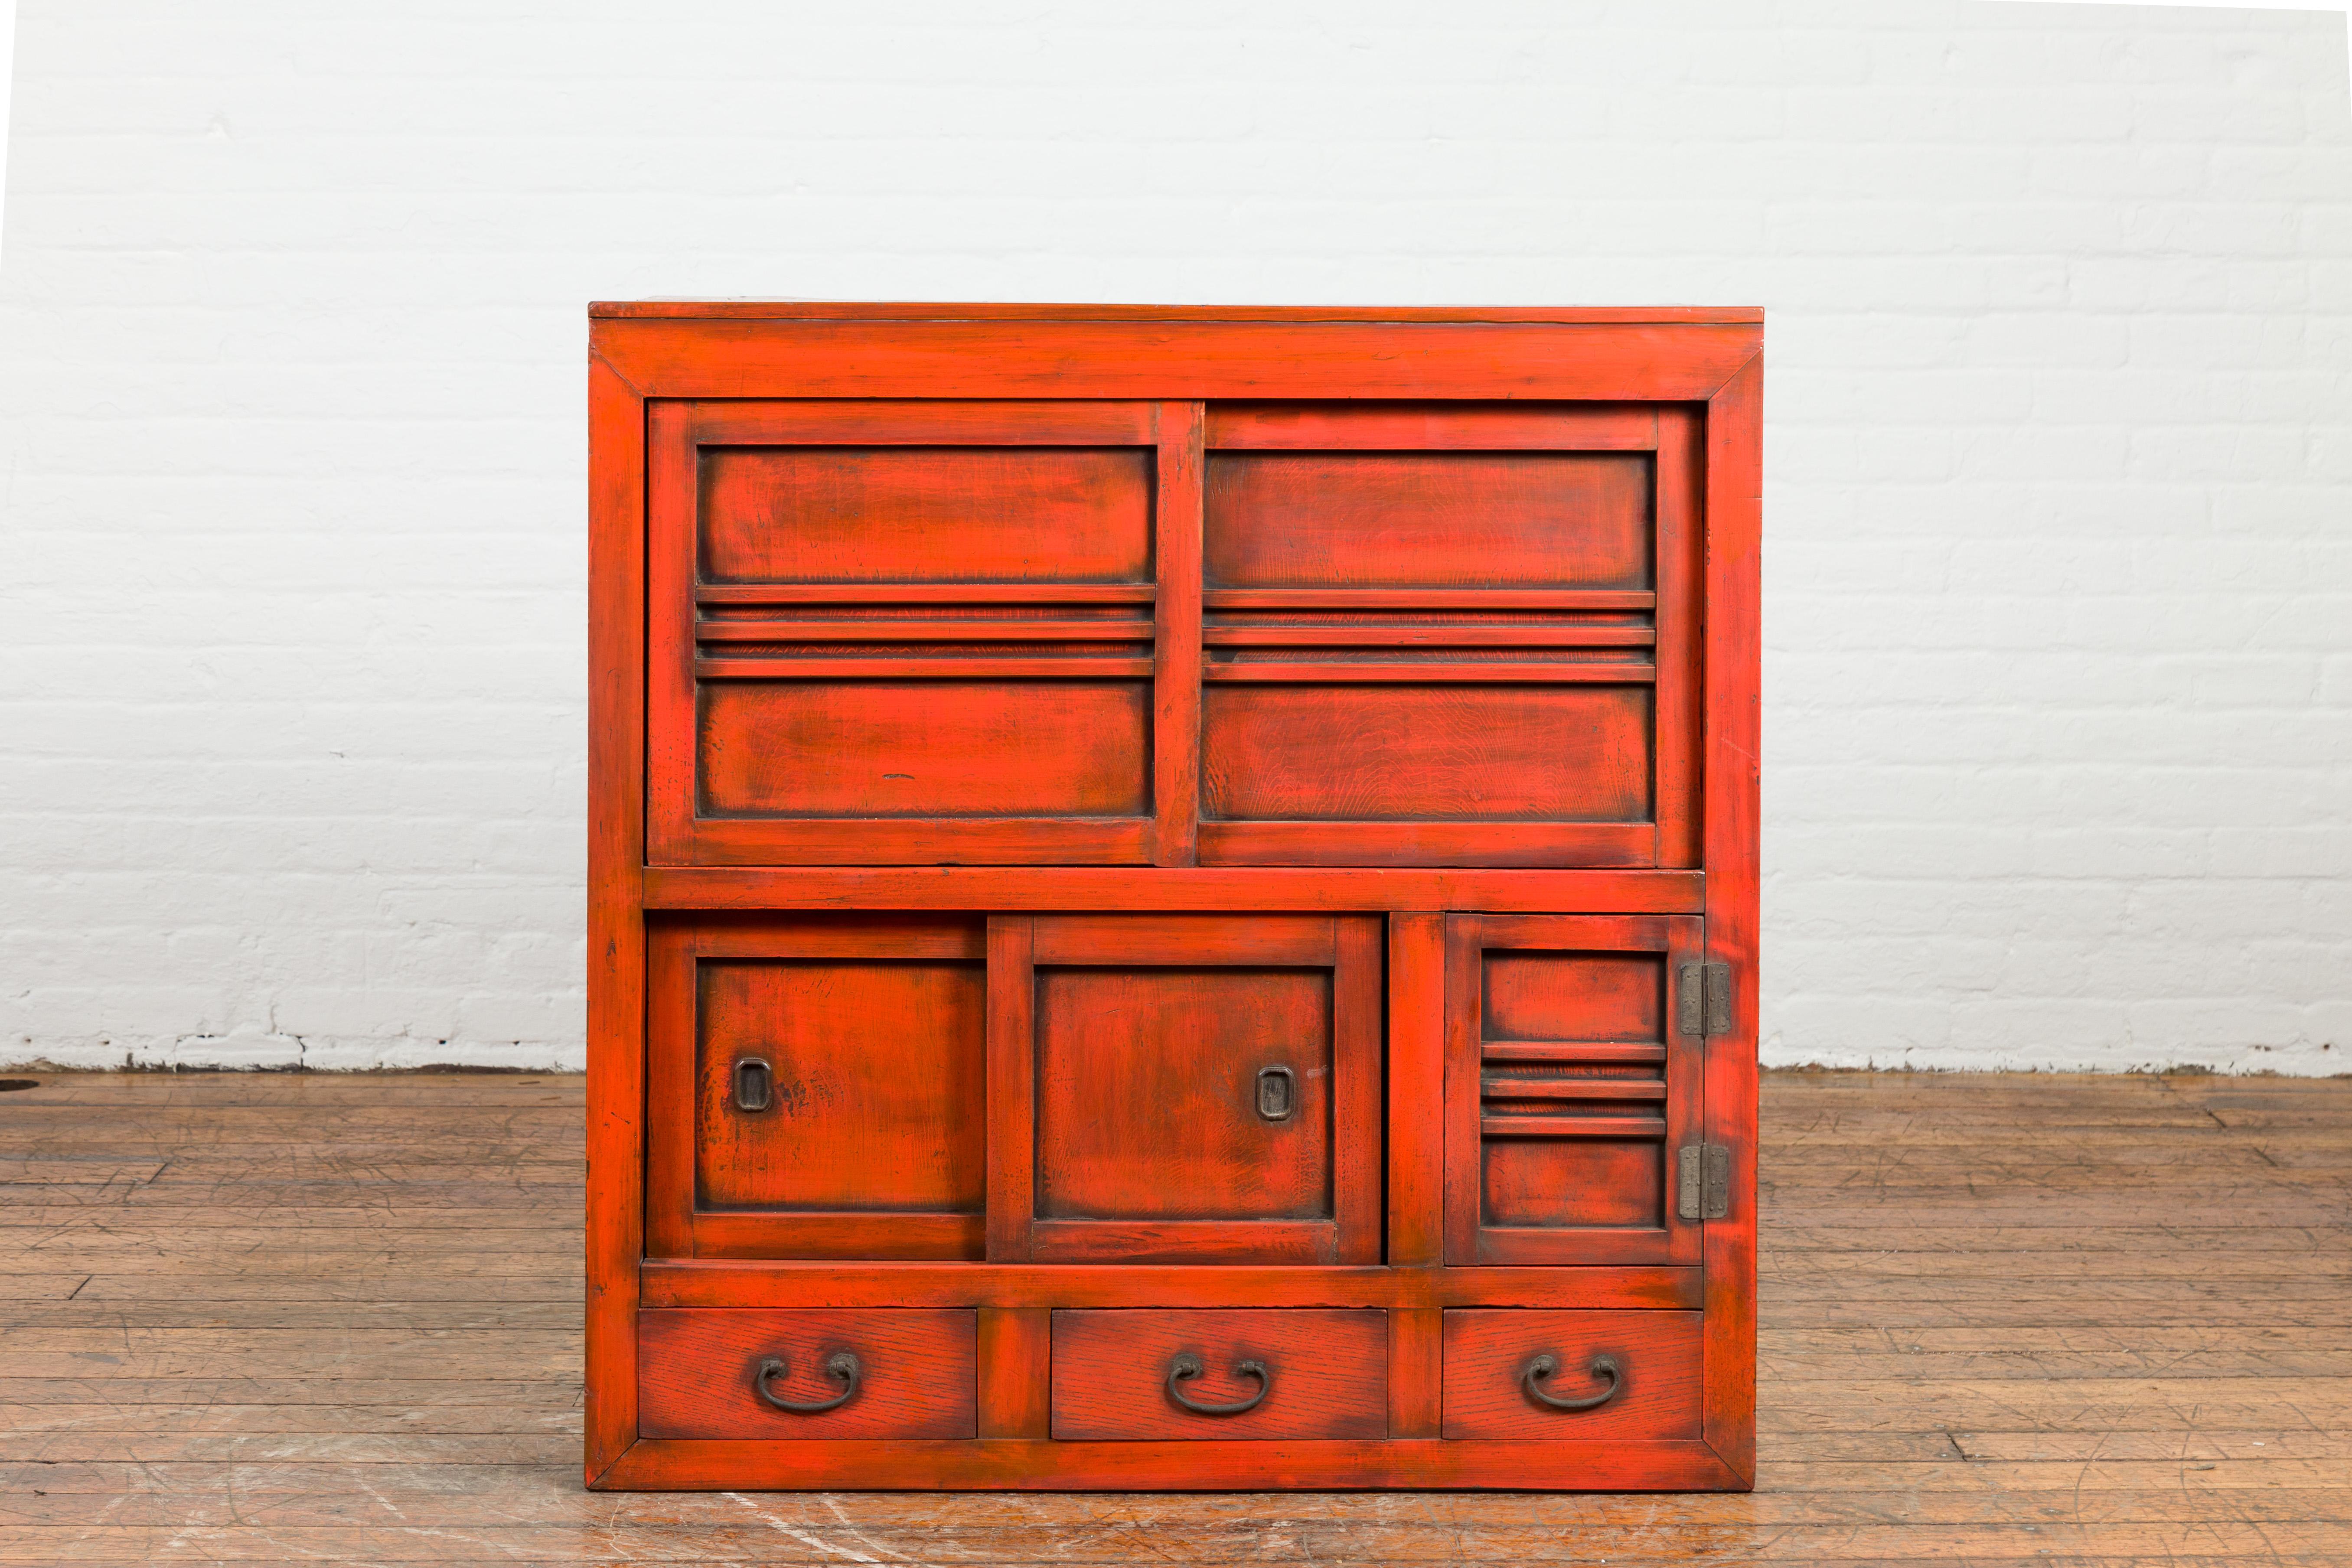 A Japanese Meiji period red cabinet from the late 19th century, with sliding doors and drawers. Created in Japan during the Meiji period, this cabinet attracts our attention with its red structure and convenient design. Sliding doors open to reveal